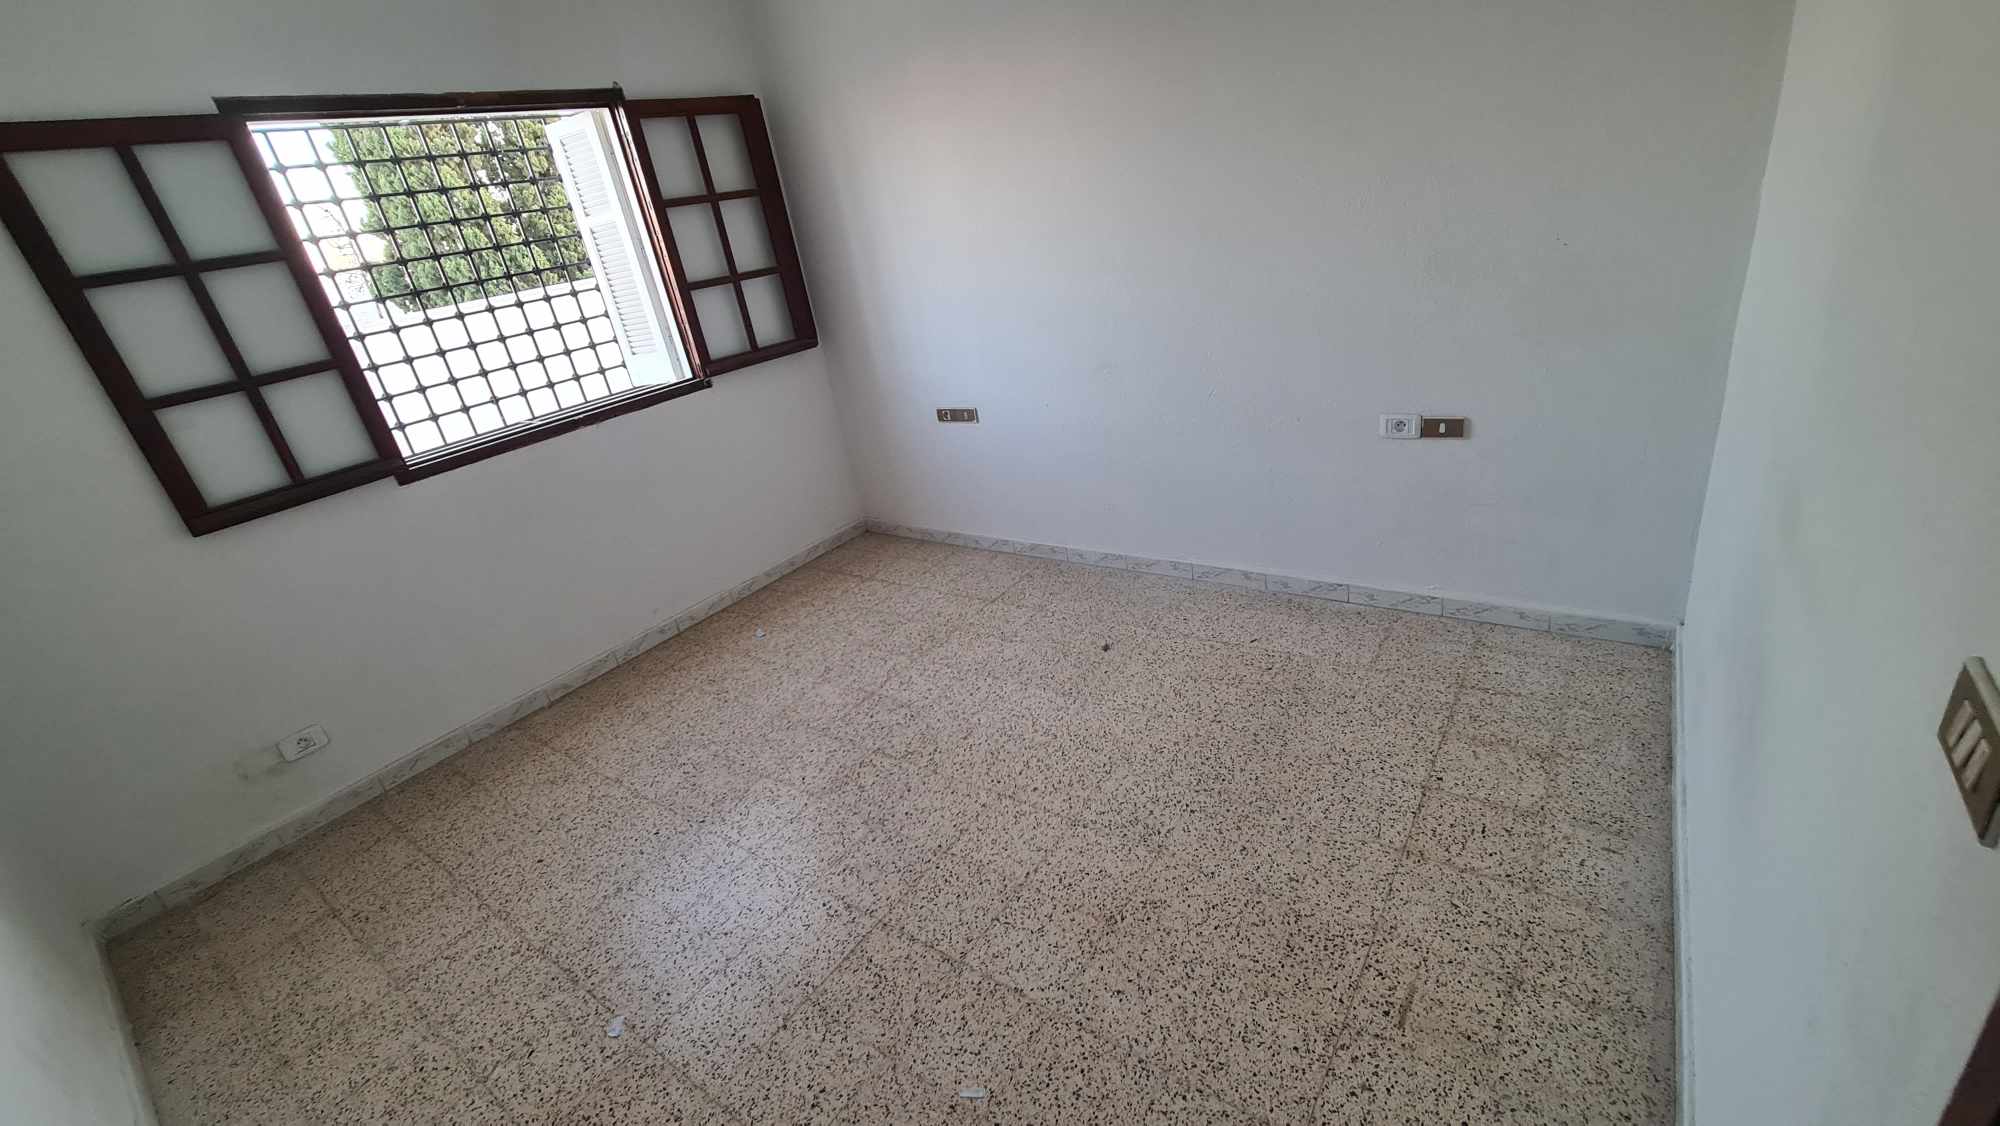 Nabeul Nabeul Location Appart. 3 pices 796eme appartement  nabeul